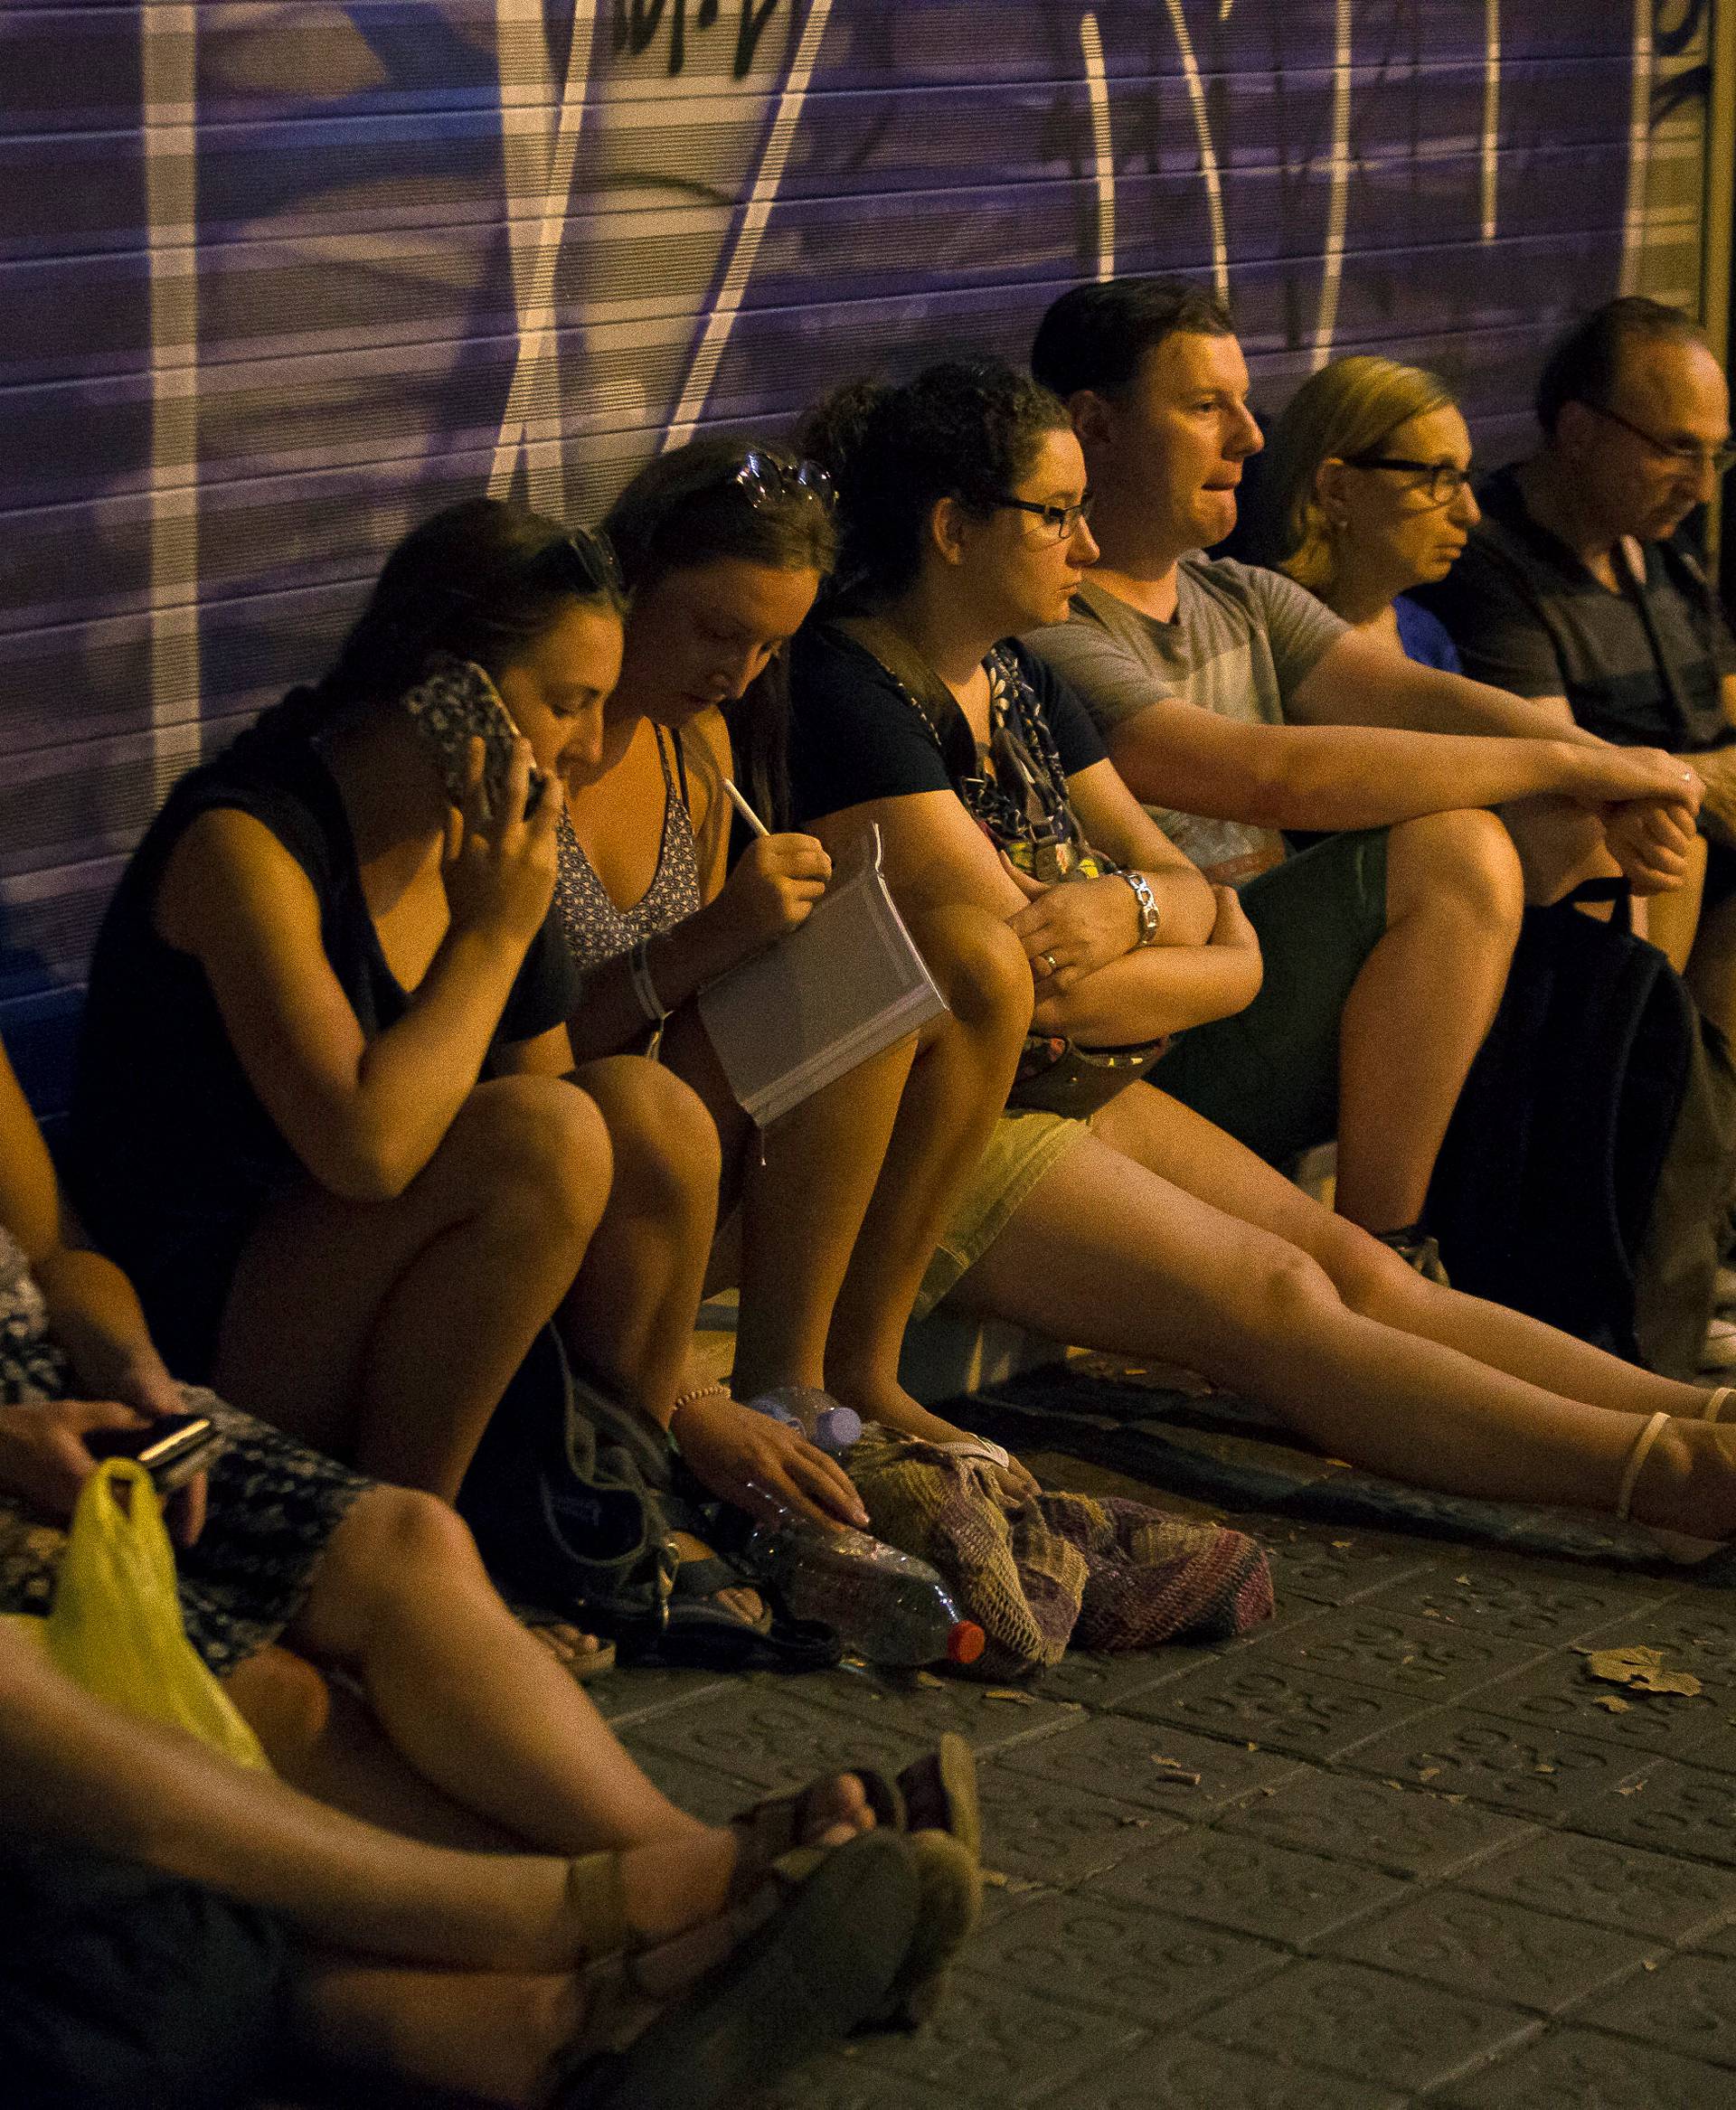 People wait to enter the area after a van crashed into pedestrians near the Las Ramblas avenue in central Barcelona